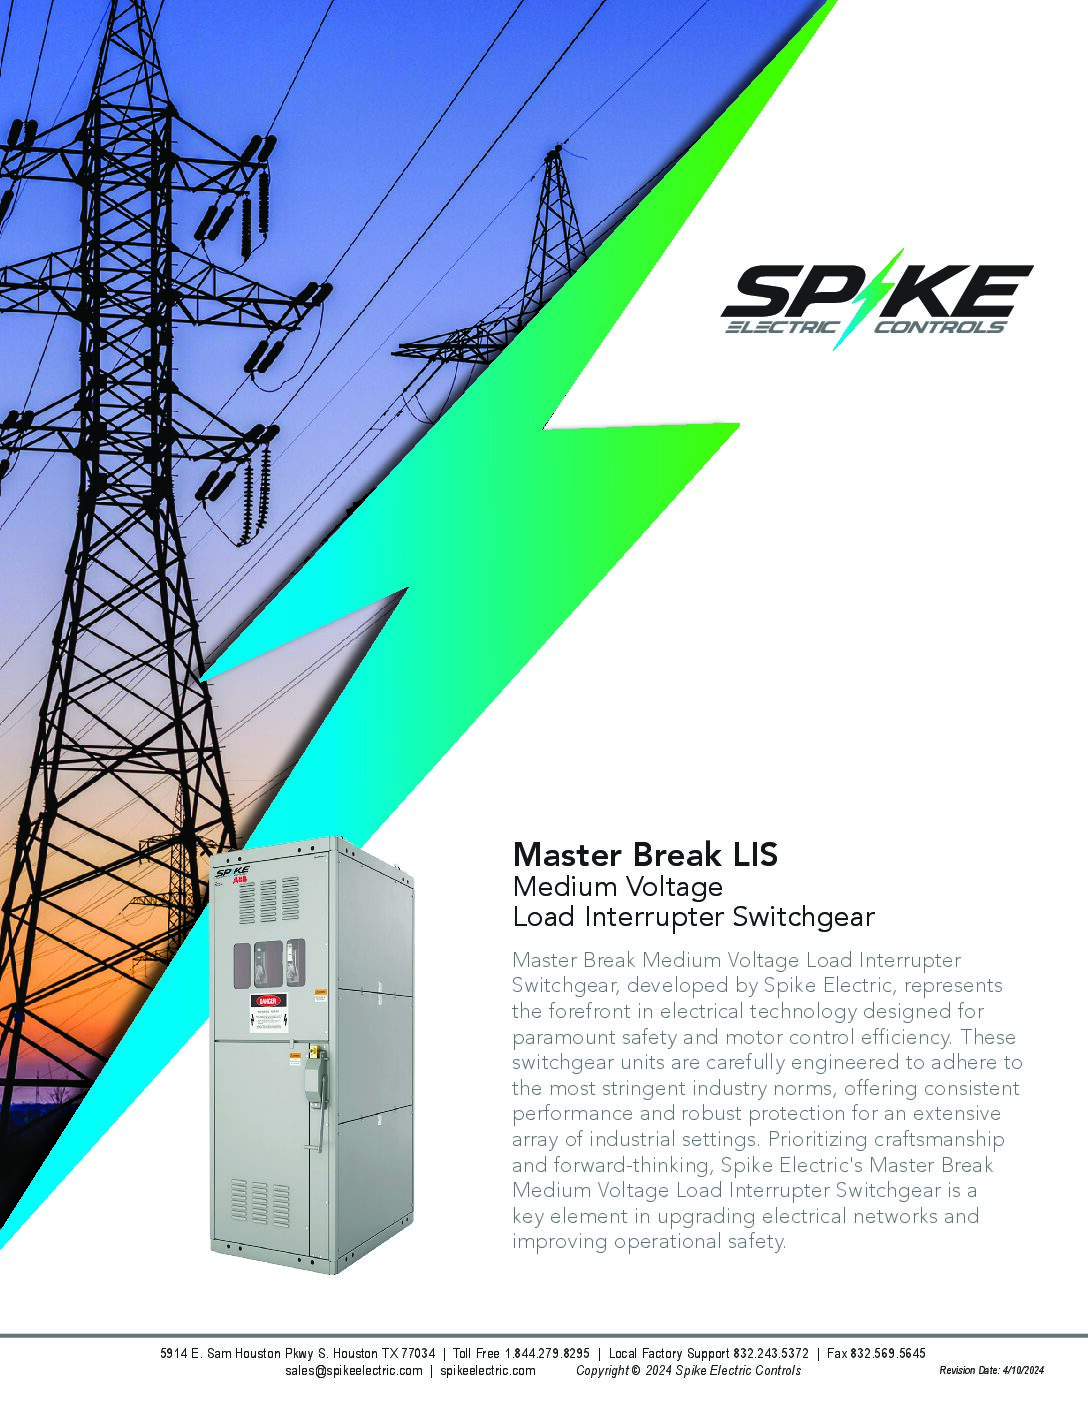 Master Break LIS Catalog from spike electric